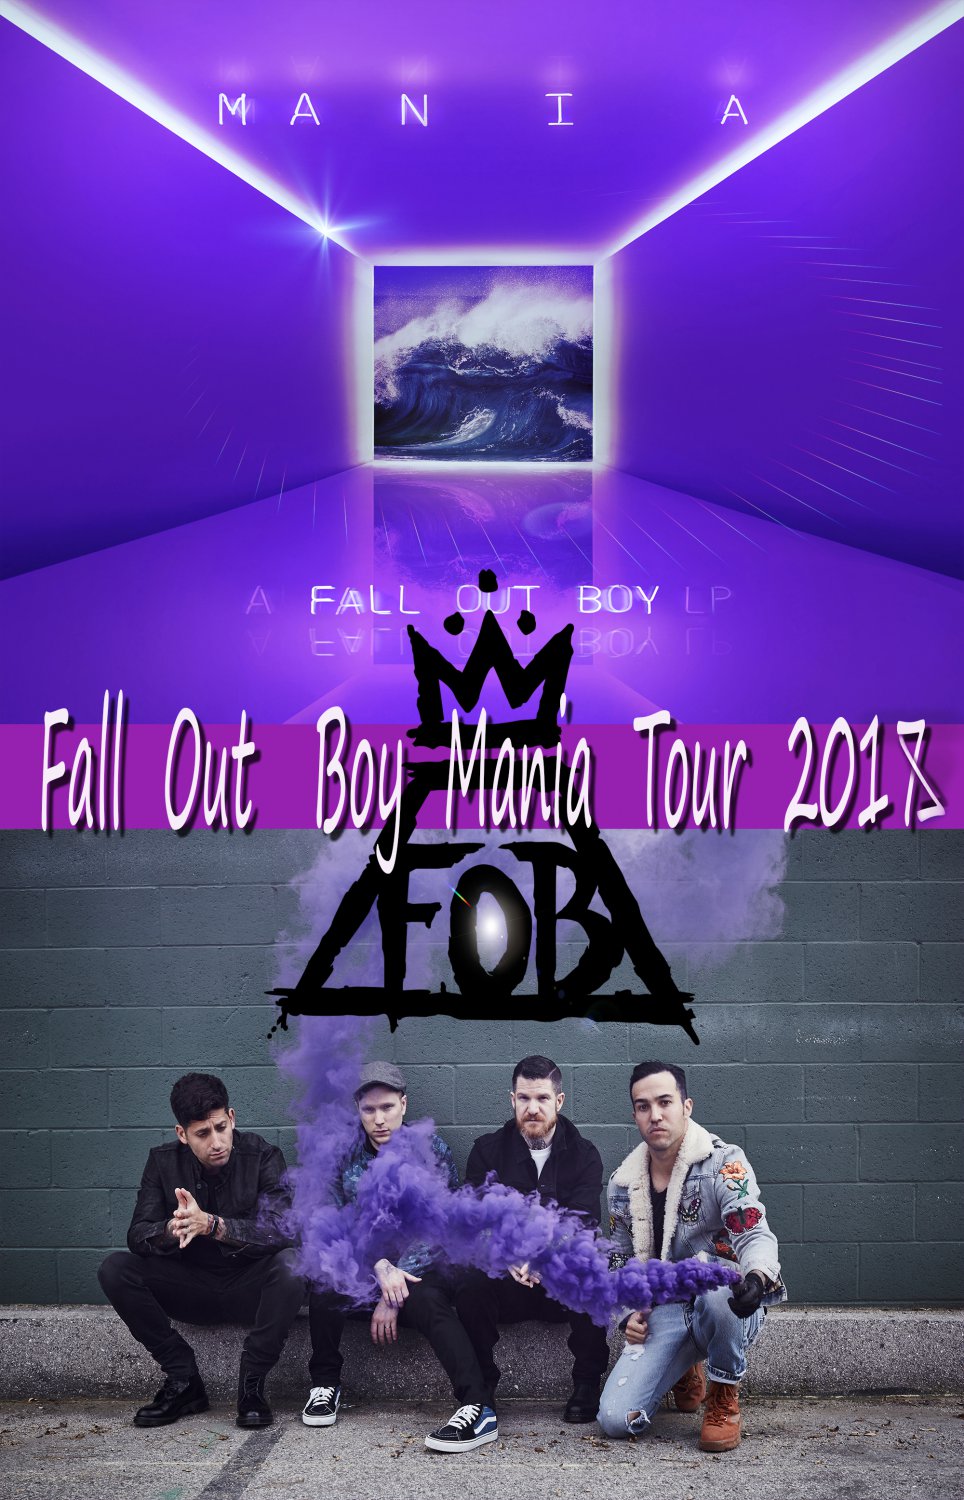 Fall Out Boy M A N I A  13"x19" (32cm/49cm) Polyester Fabric Poster